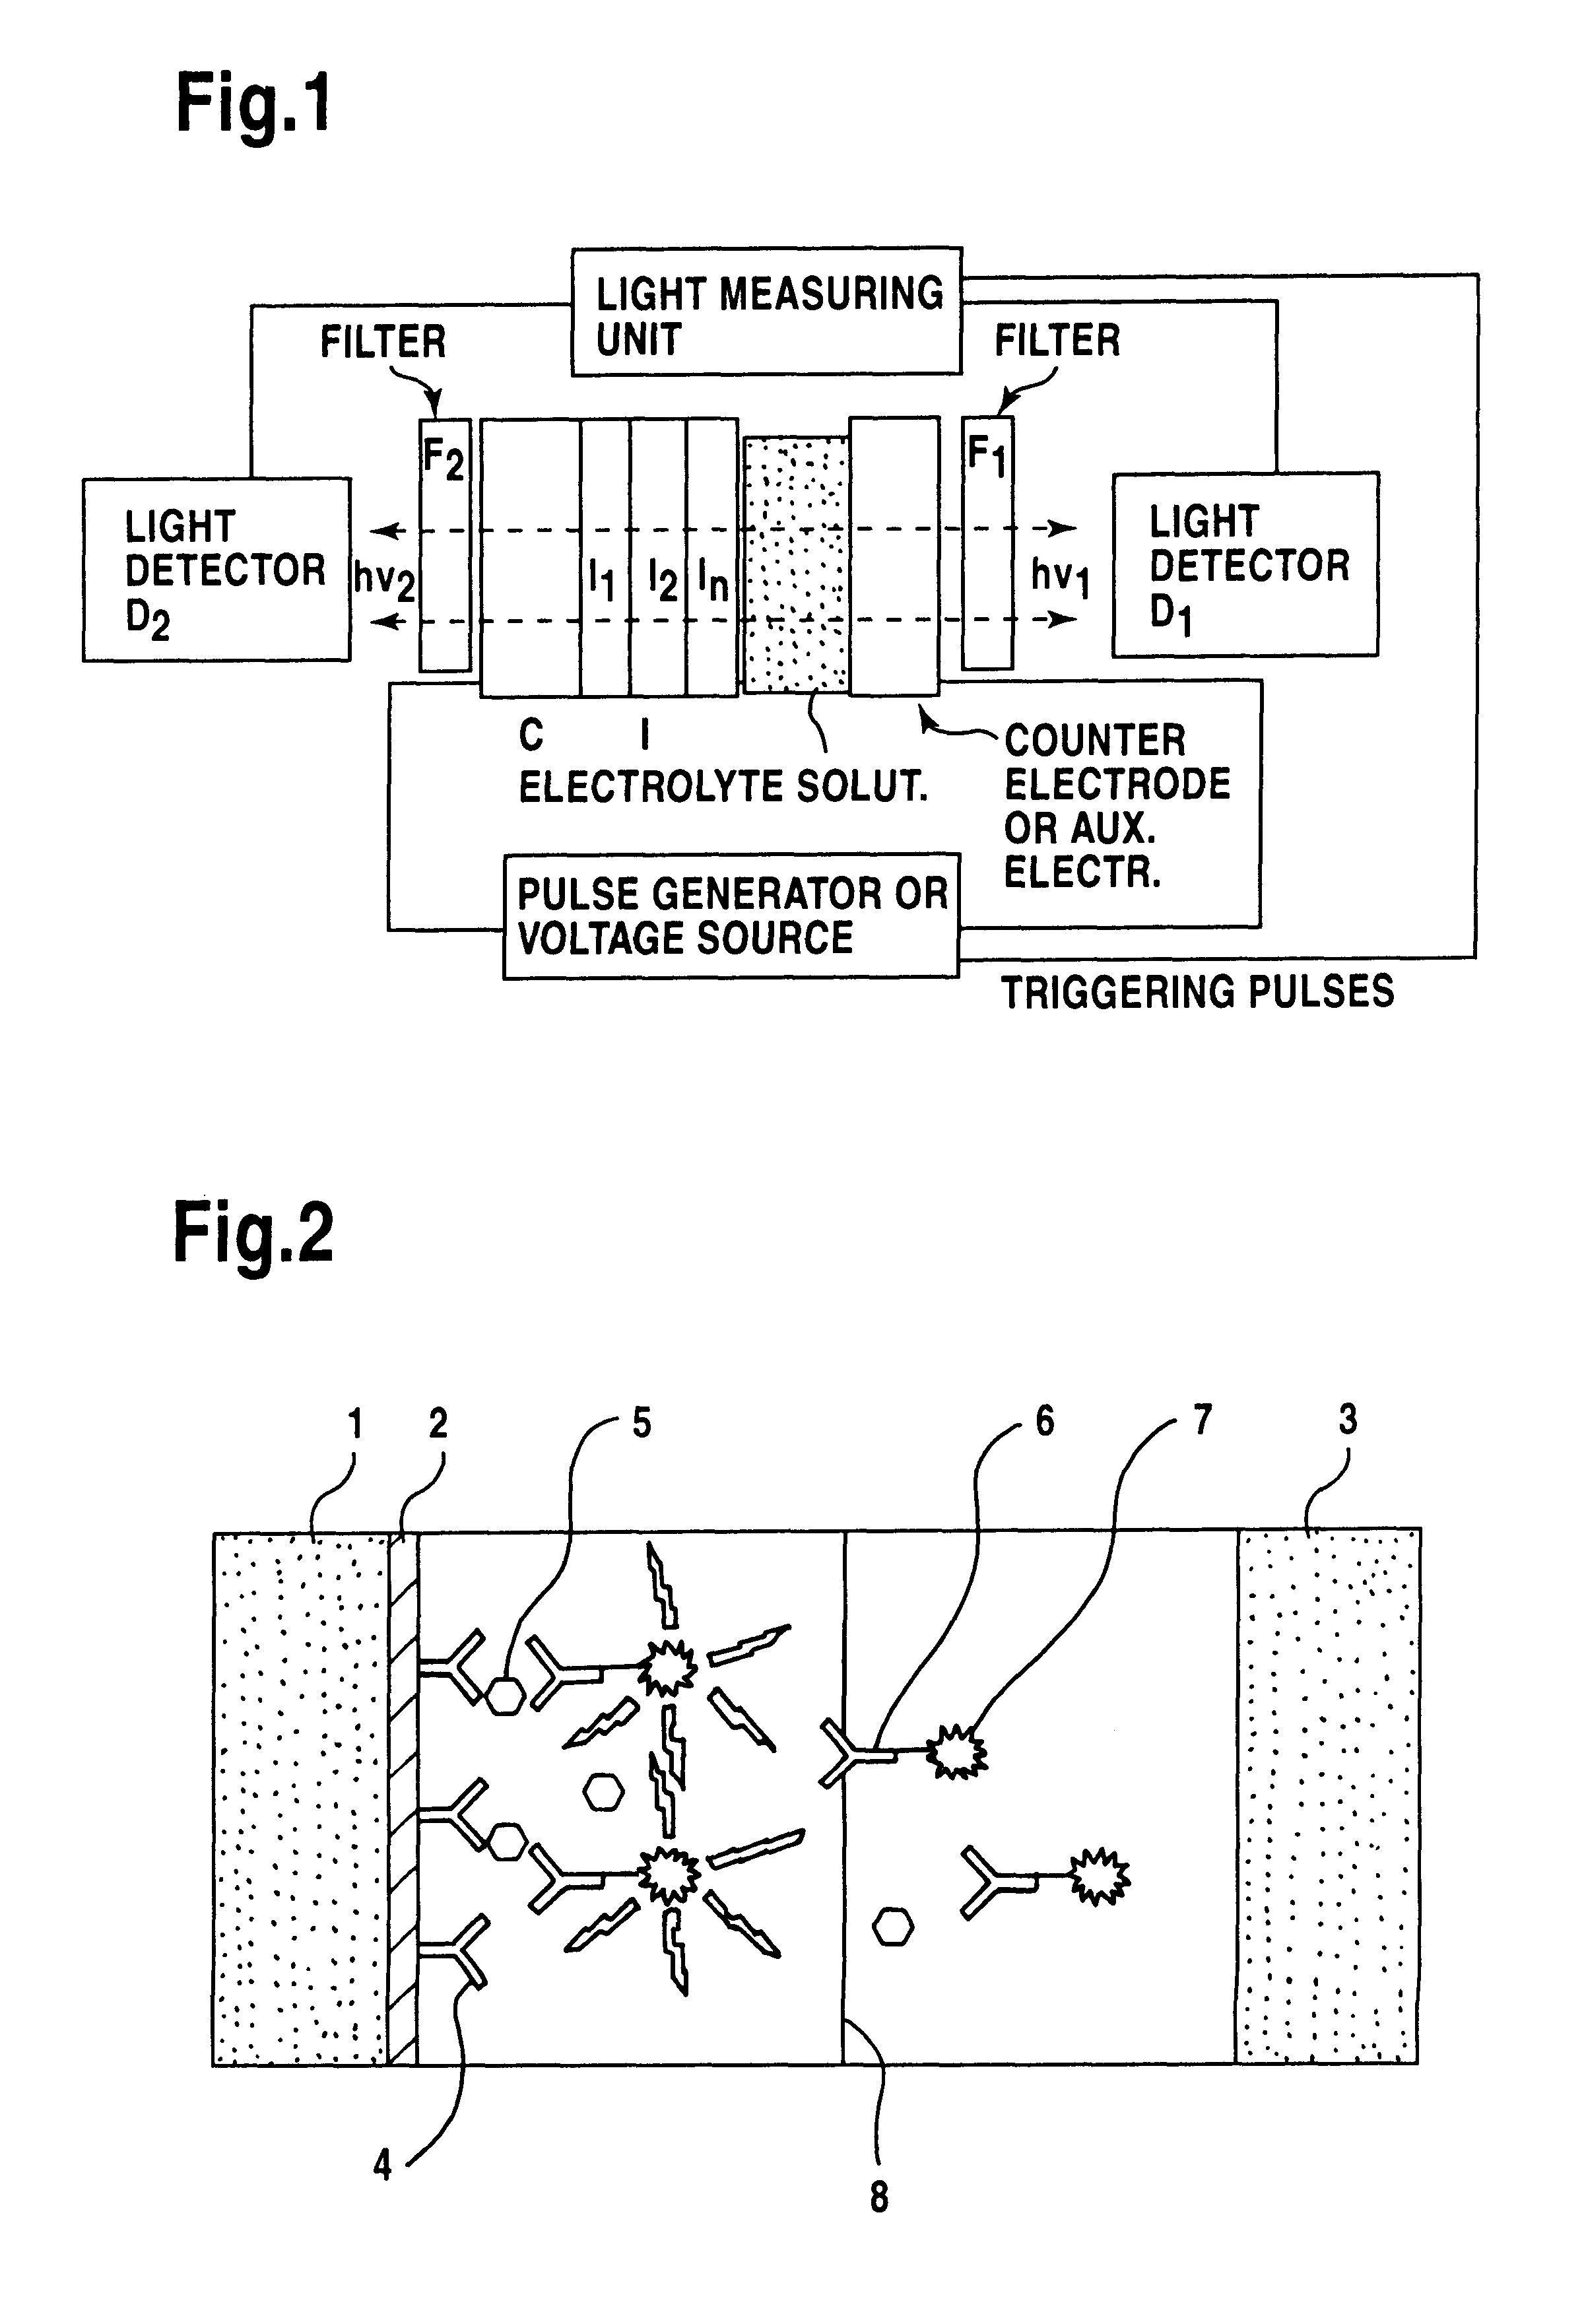 Electrical excitation of label substances at insulating film-coated conductors